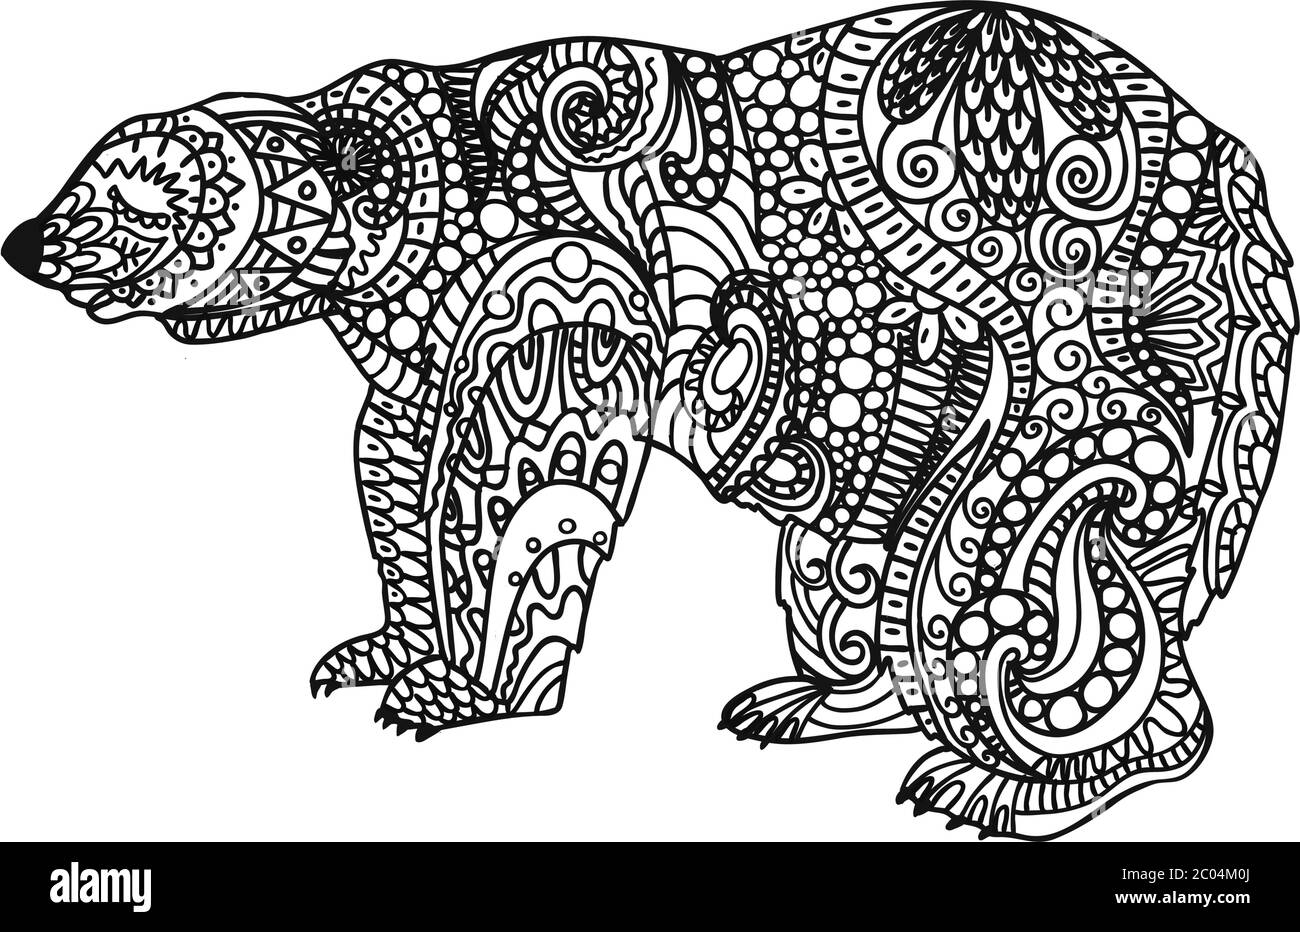 The bear is black and white. Polar Bear coloring page. Linear ...